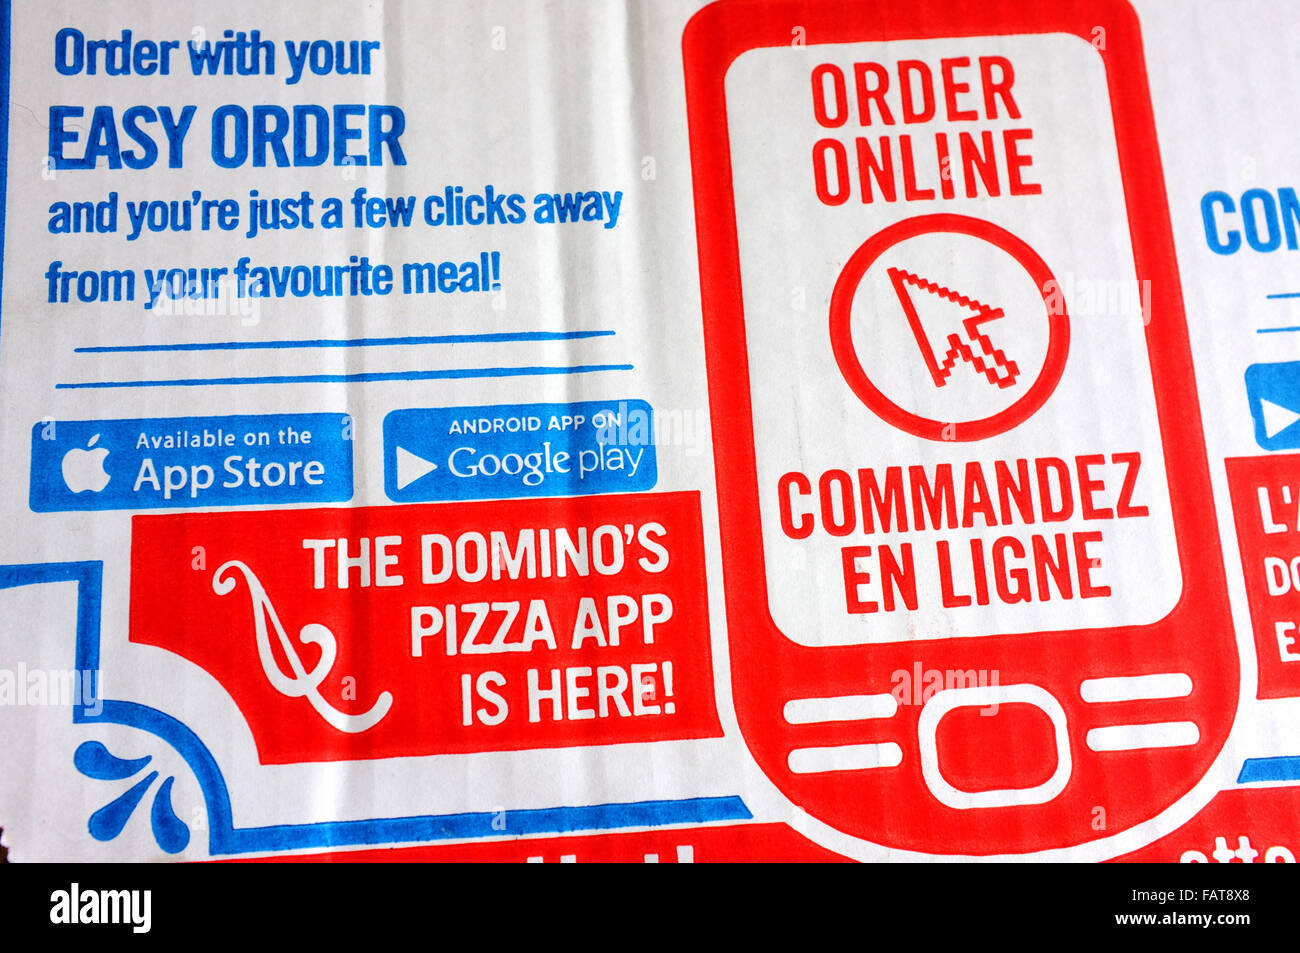 A Dominos pizza box with an order online advert on it. Stock Photo